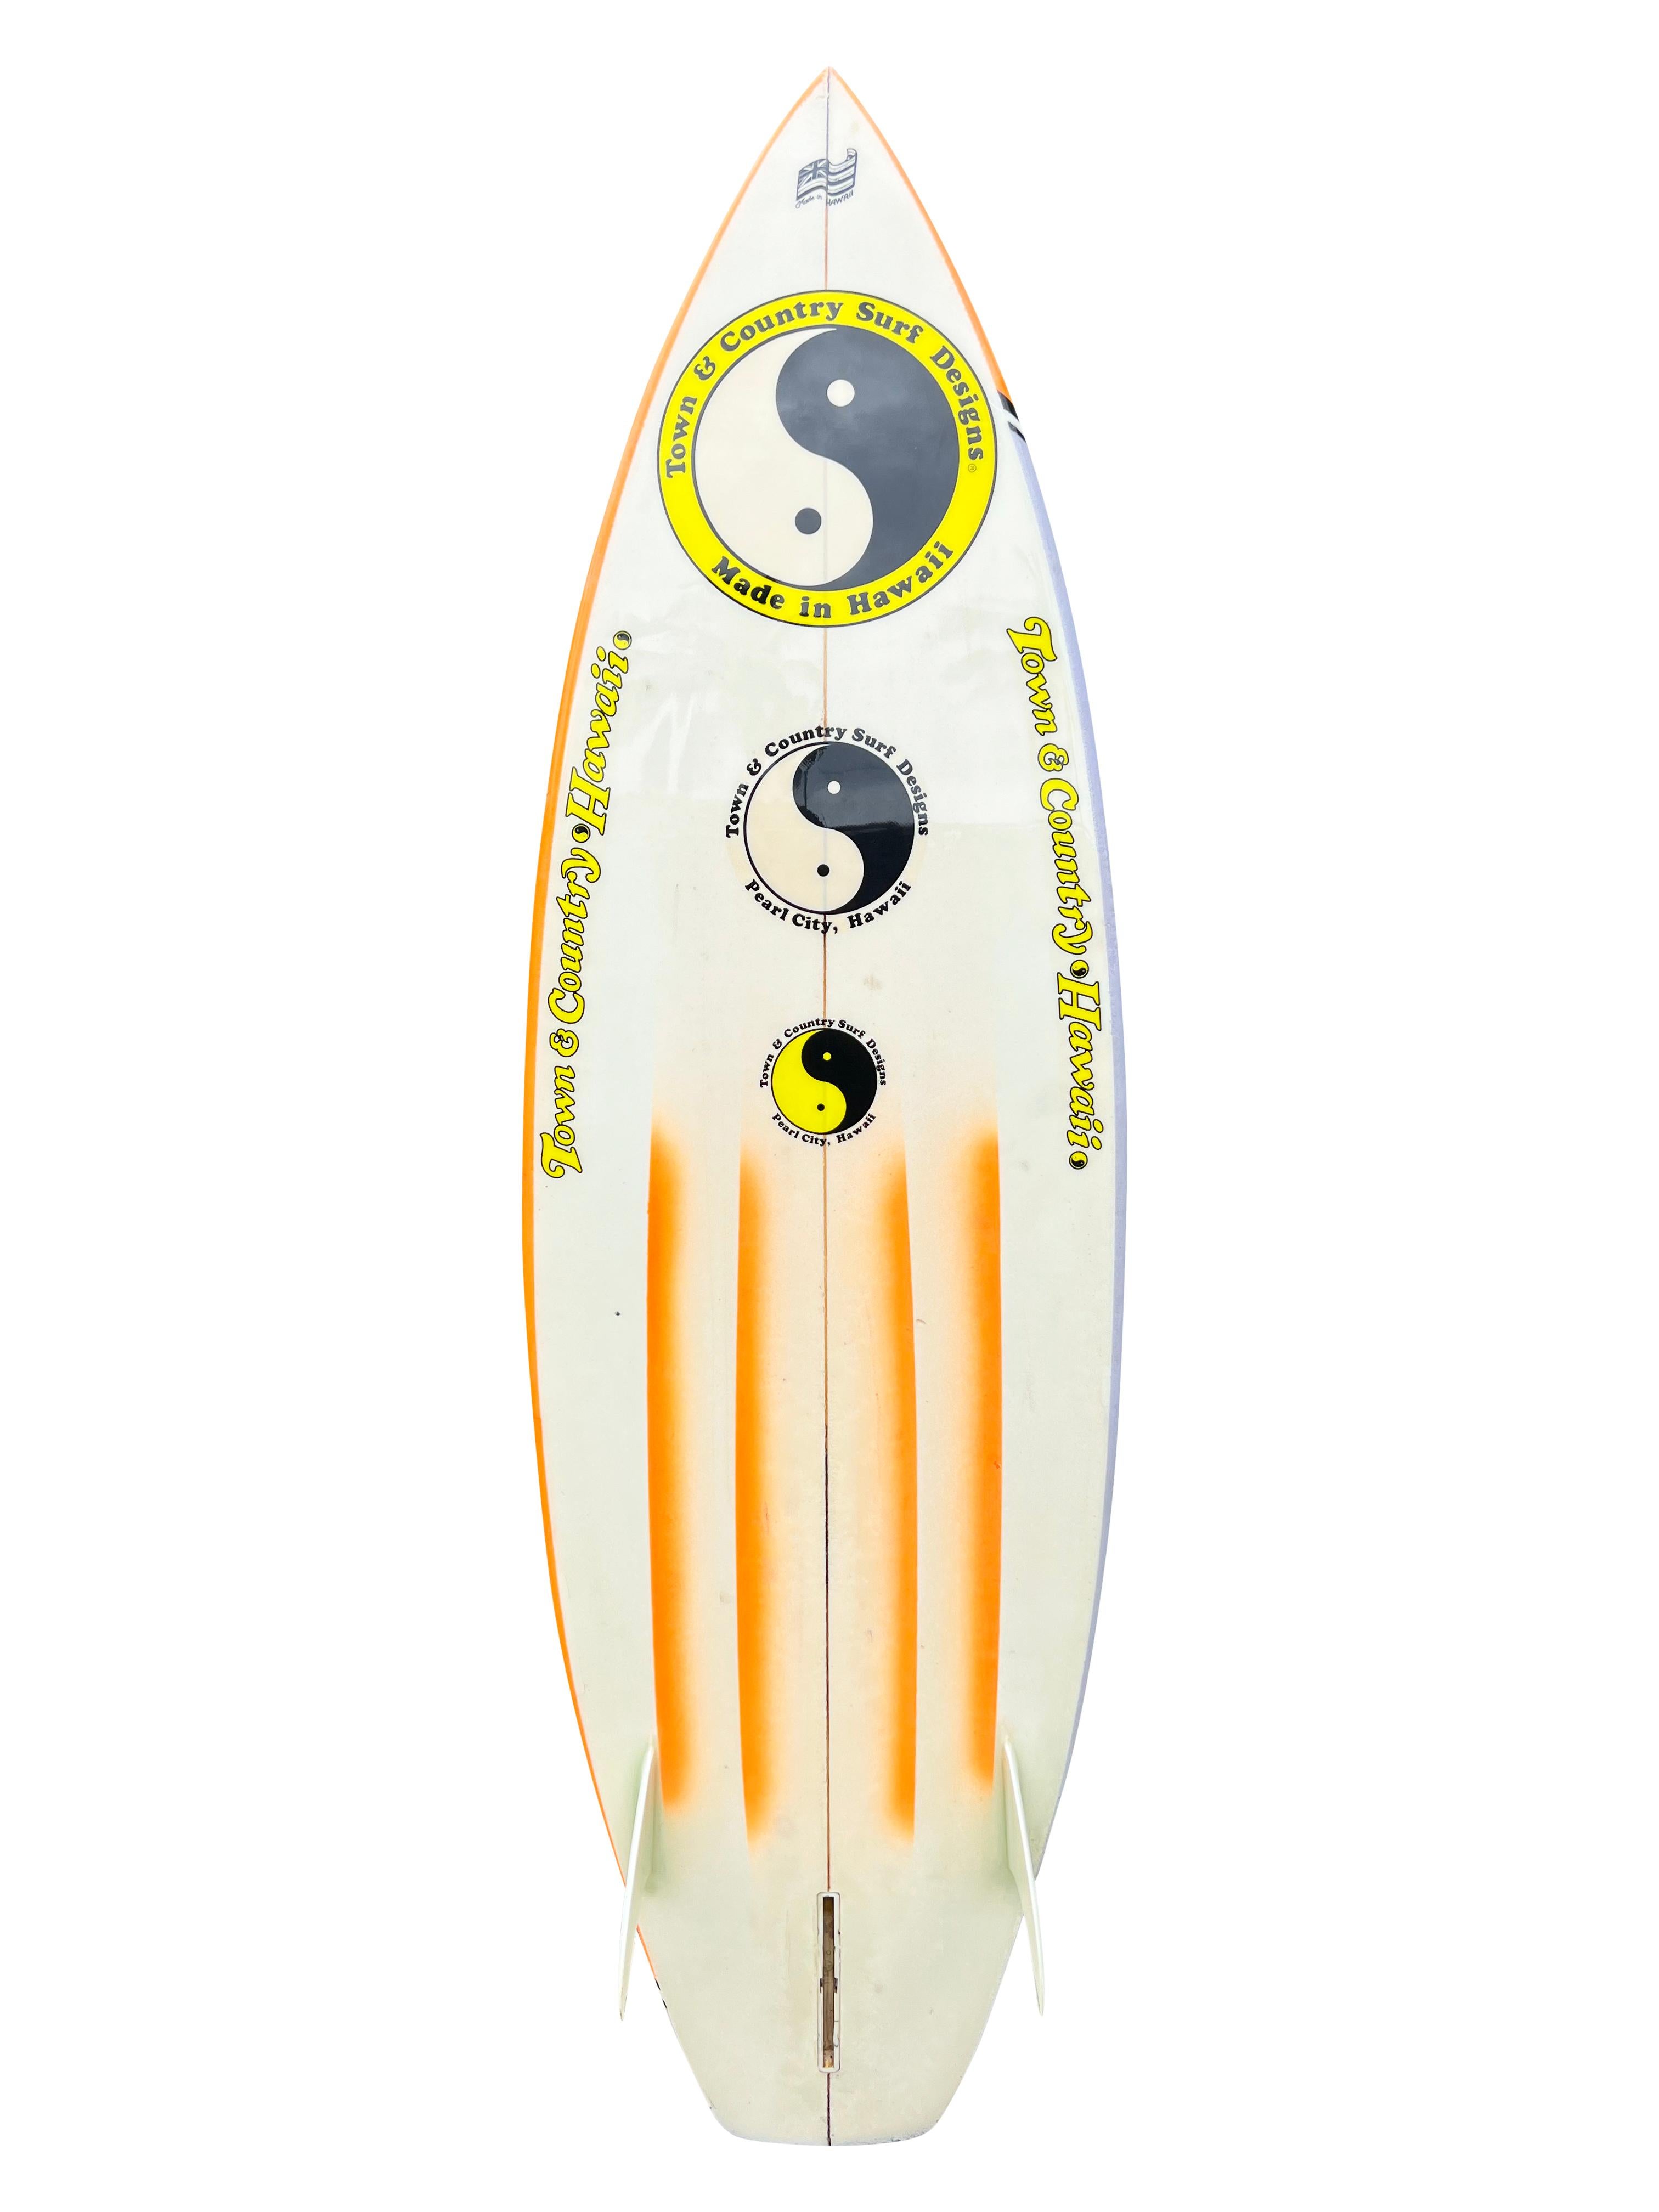 1983 Town & Country surfboard made by Nev Hyman. Features a remarkable airbrush design with 1980s style. Channel bottom squash tail. Nev Hyman, FireWire Surfboards founder and co-owner. FireWire is one of the most successful surfboard labels in